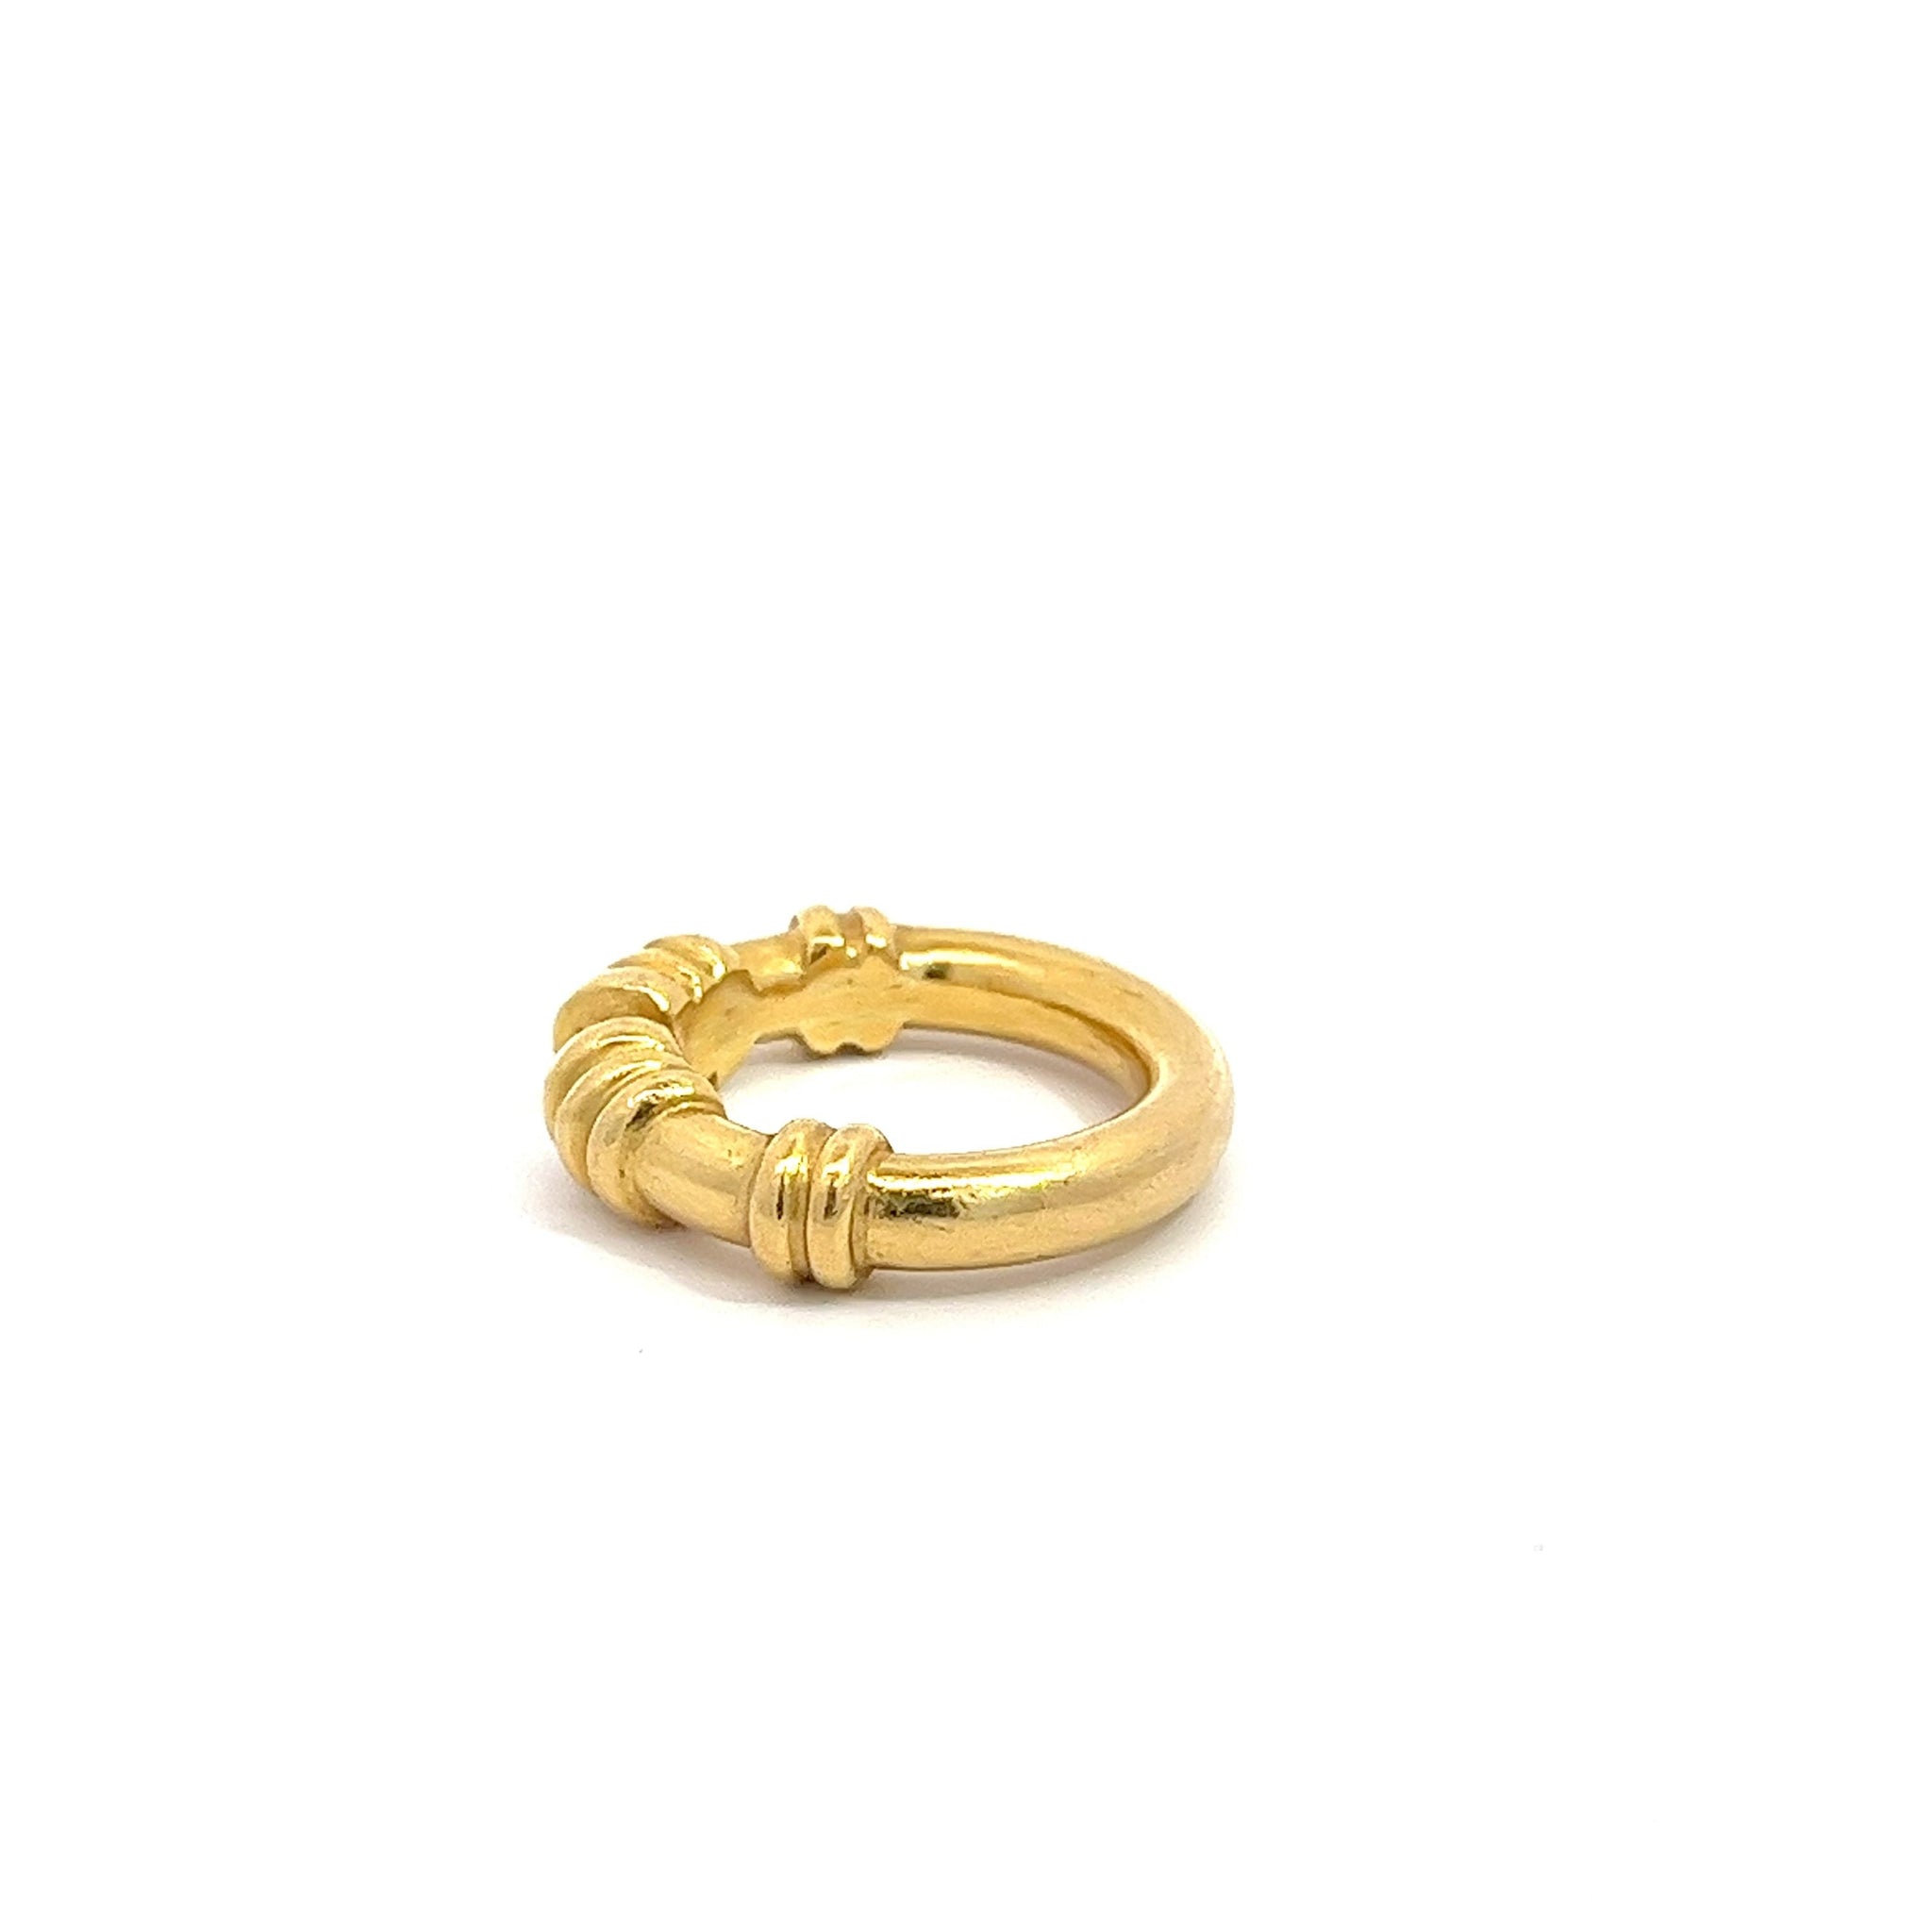 22k Solid Yellow Gold Textured Open Gap Unclosed Ring